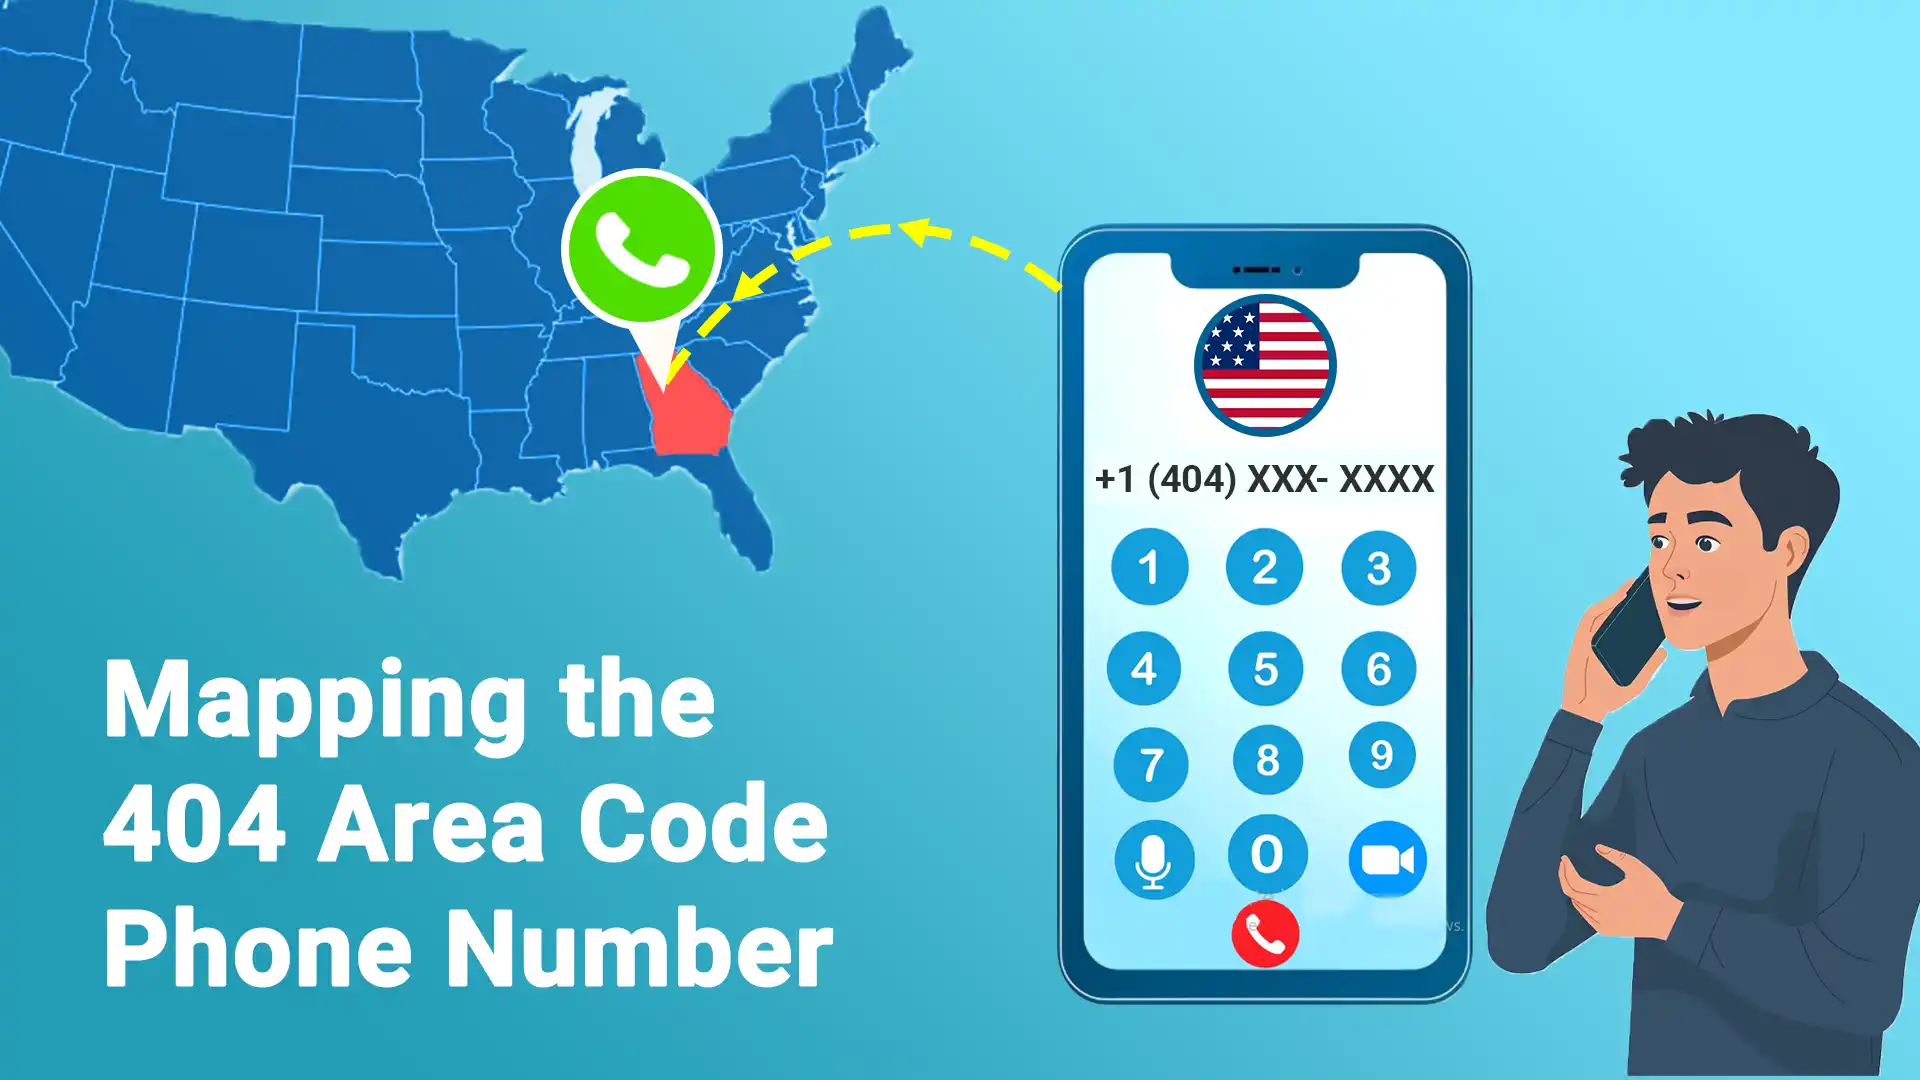 Mapping the 404 Area Code Phone Number